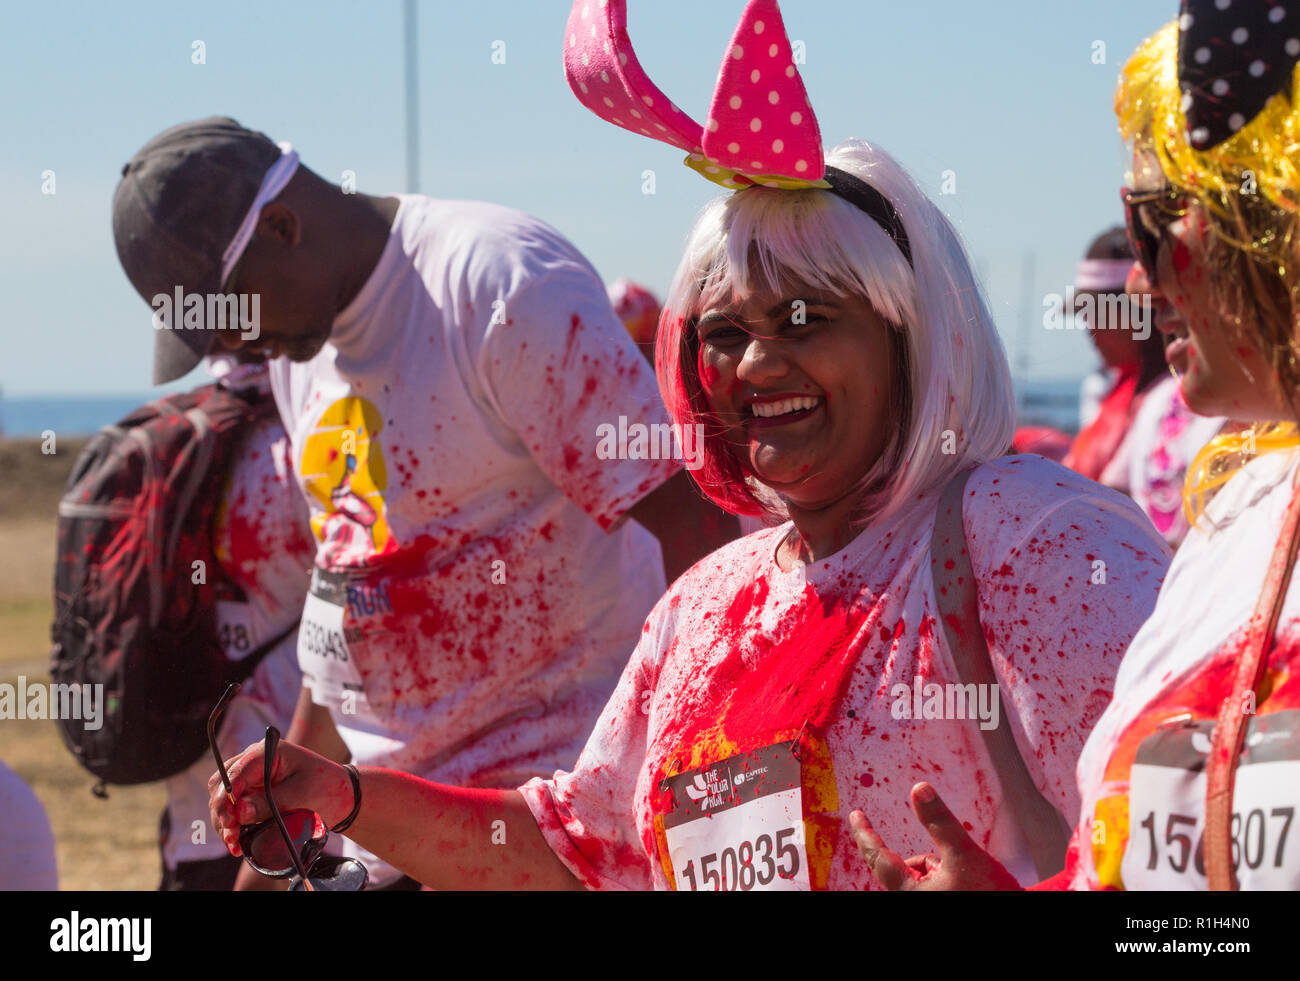 mixed race woman wearing a pair of pink polka dot bunny ears and blonde wig smiling at camera walking with group of friends in fun run sports event Stock Photo